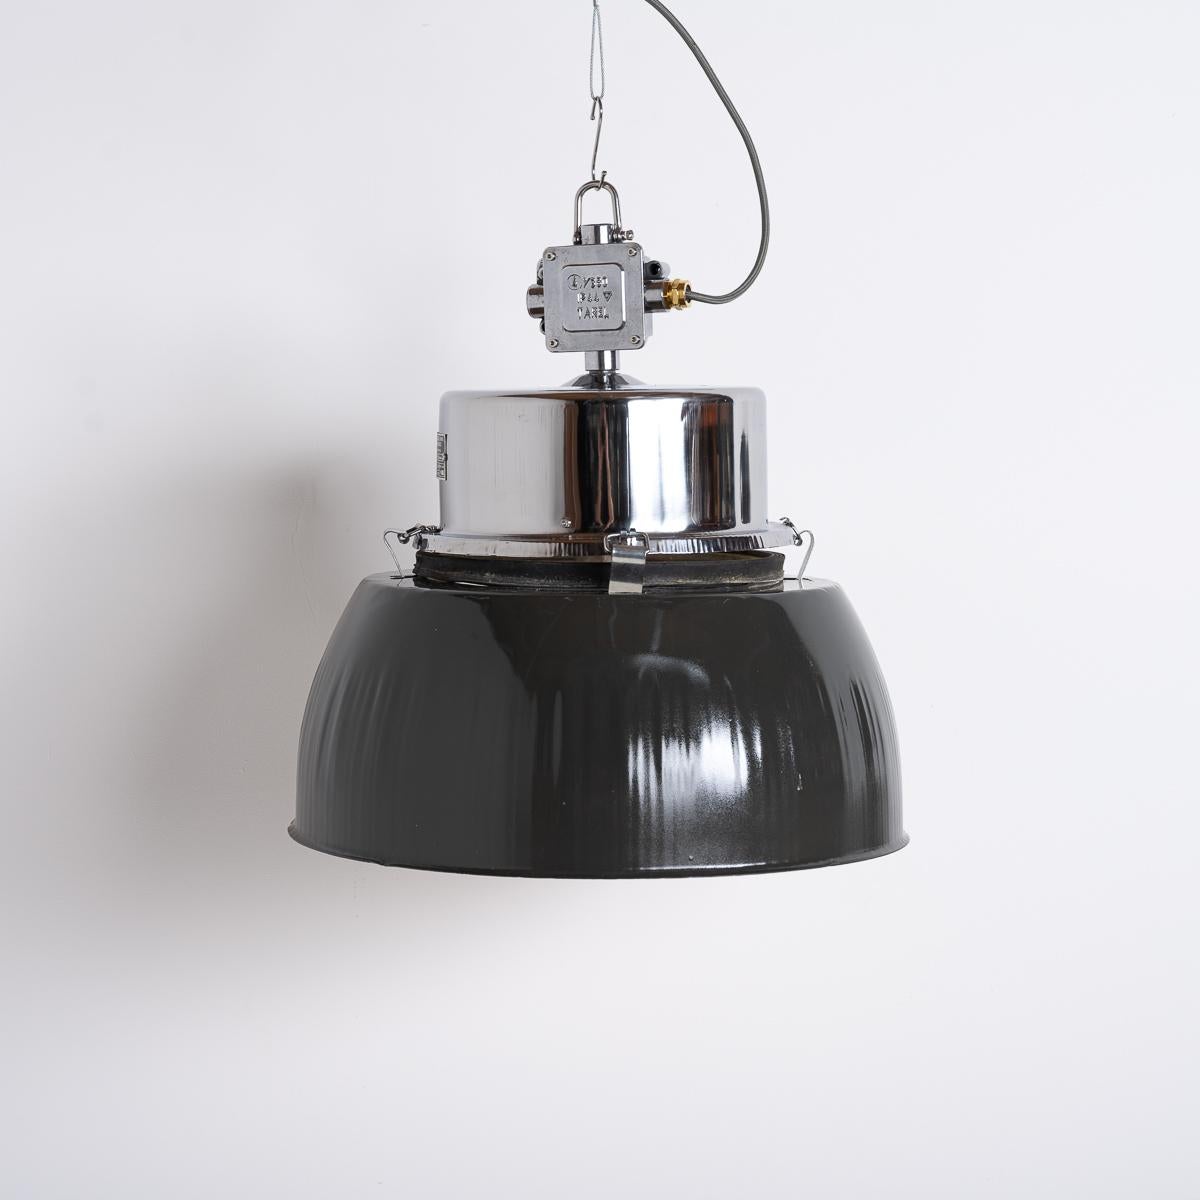 RECLAIMED EXTRA LARGE FACTORY LIGHTS FROM EASTERN EUROPE

These oversized industrial pendant lights once illuminated factories across eastern Europe.

Made in Poland circa 1985 by ZAKLADY METALOWE PREDOM - MESKO.

Original product plate is intact